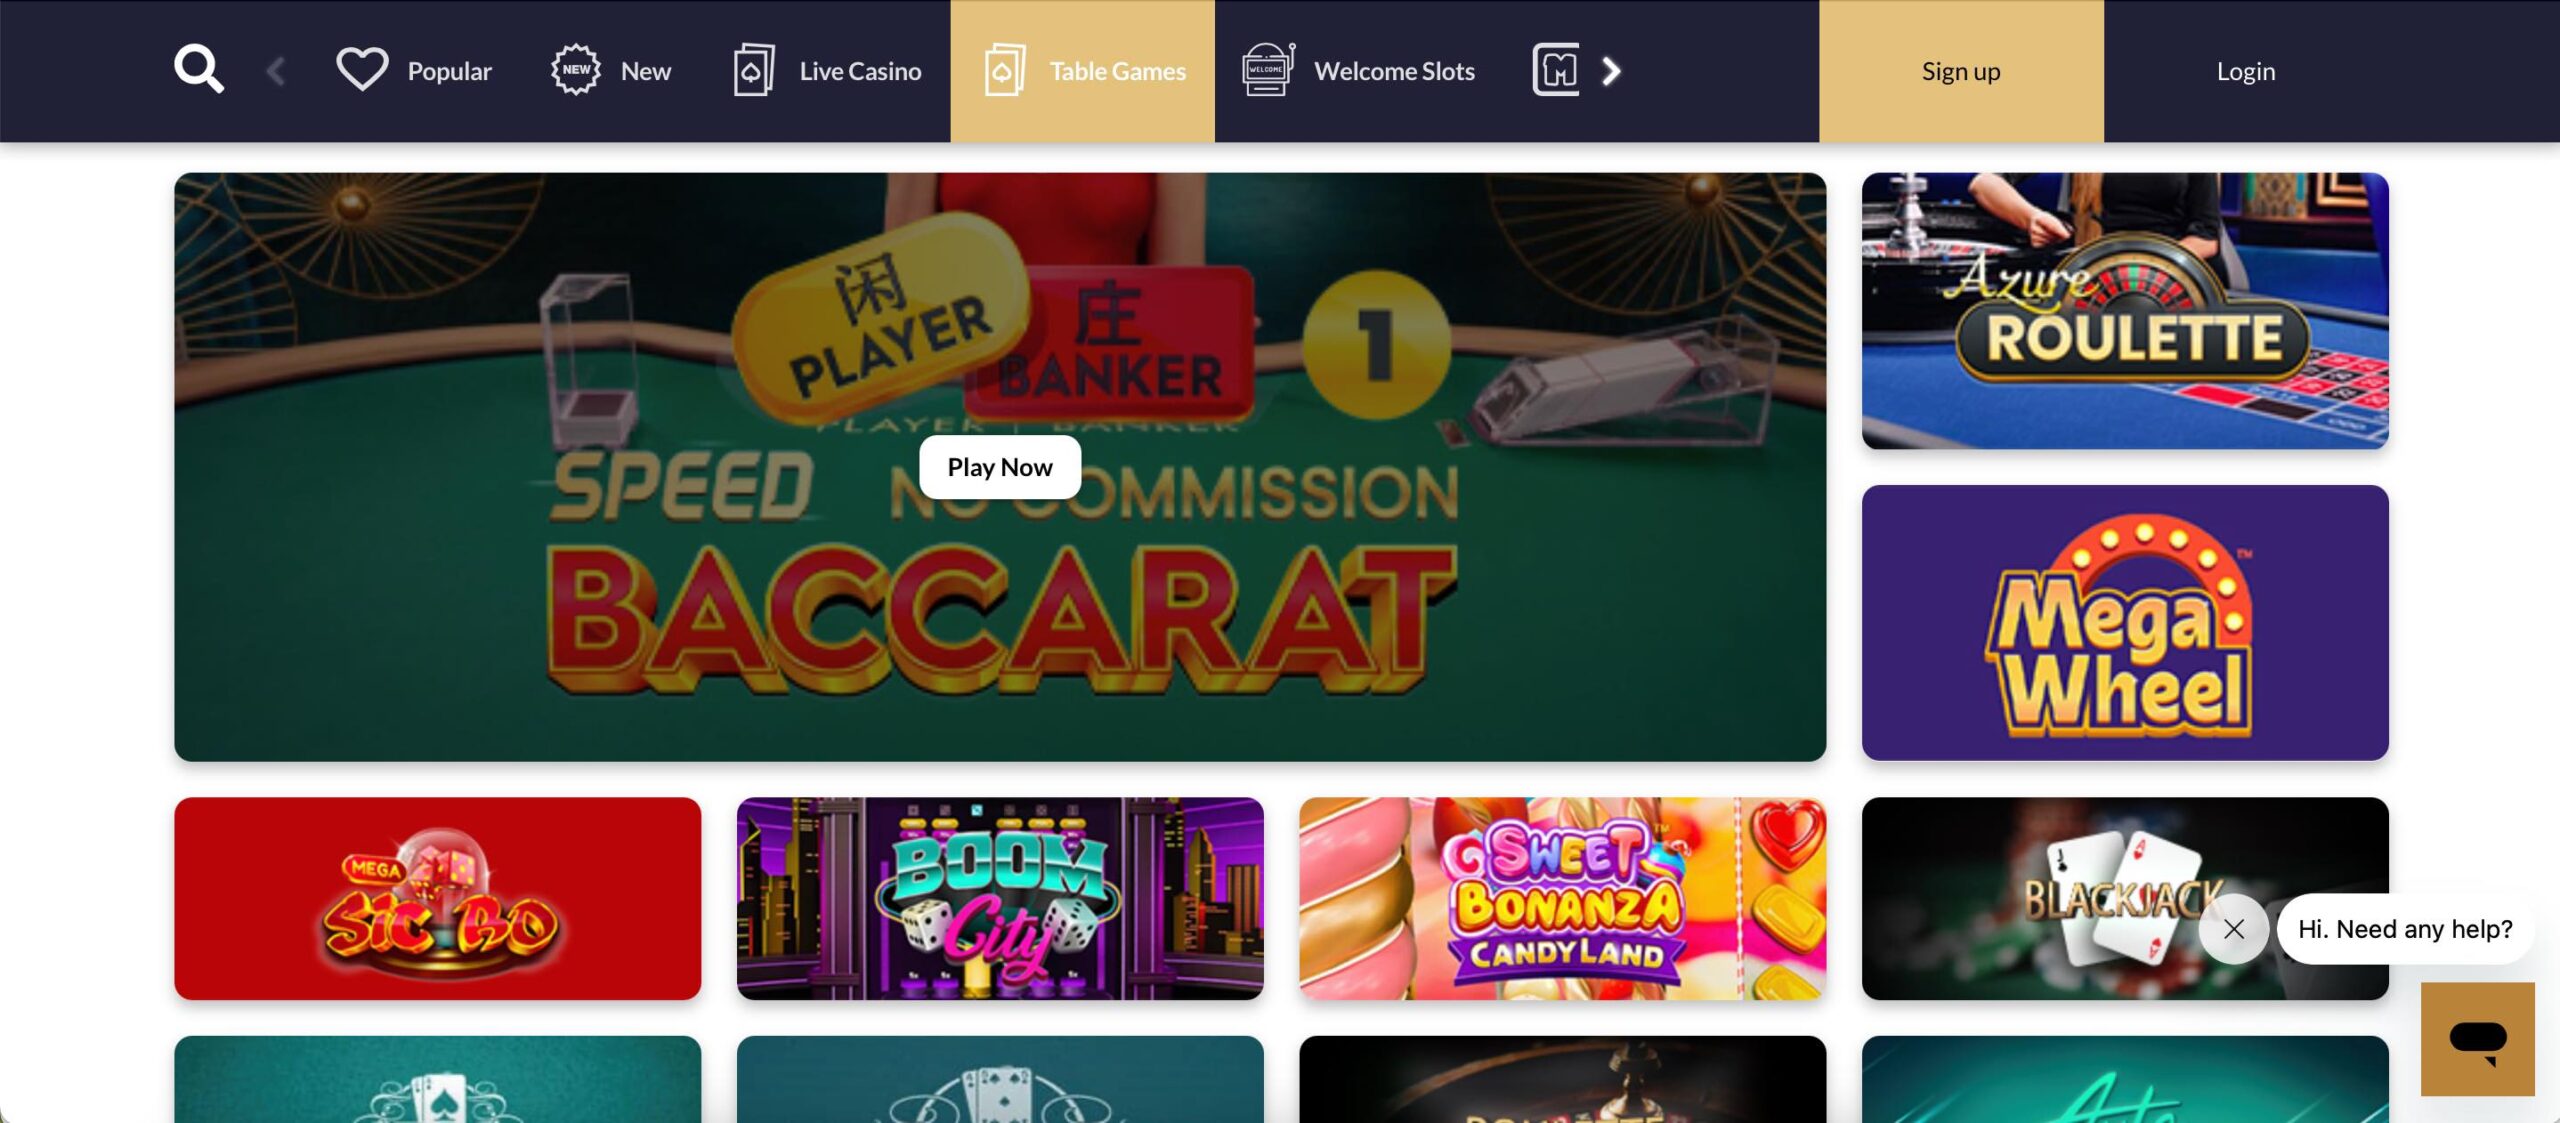 Jackpot Mobile Casino Table Games